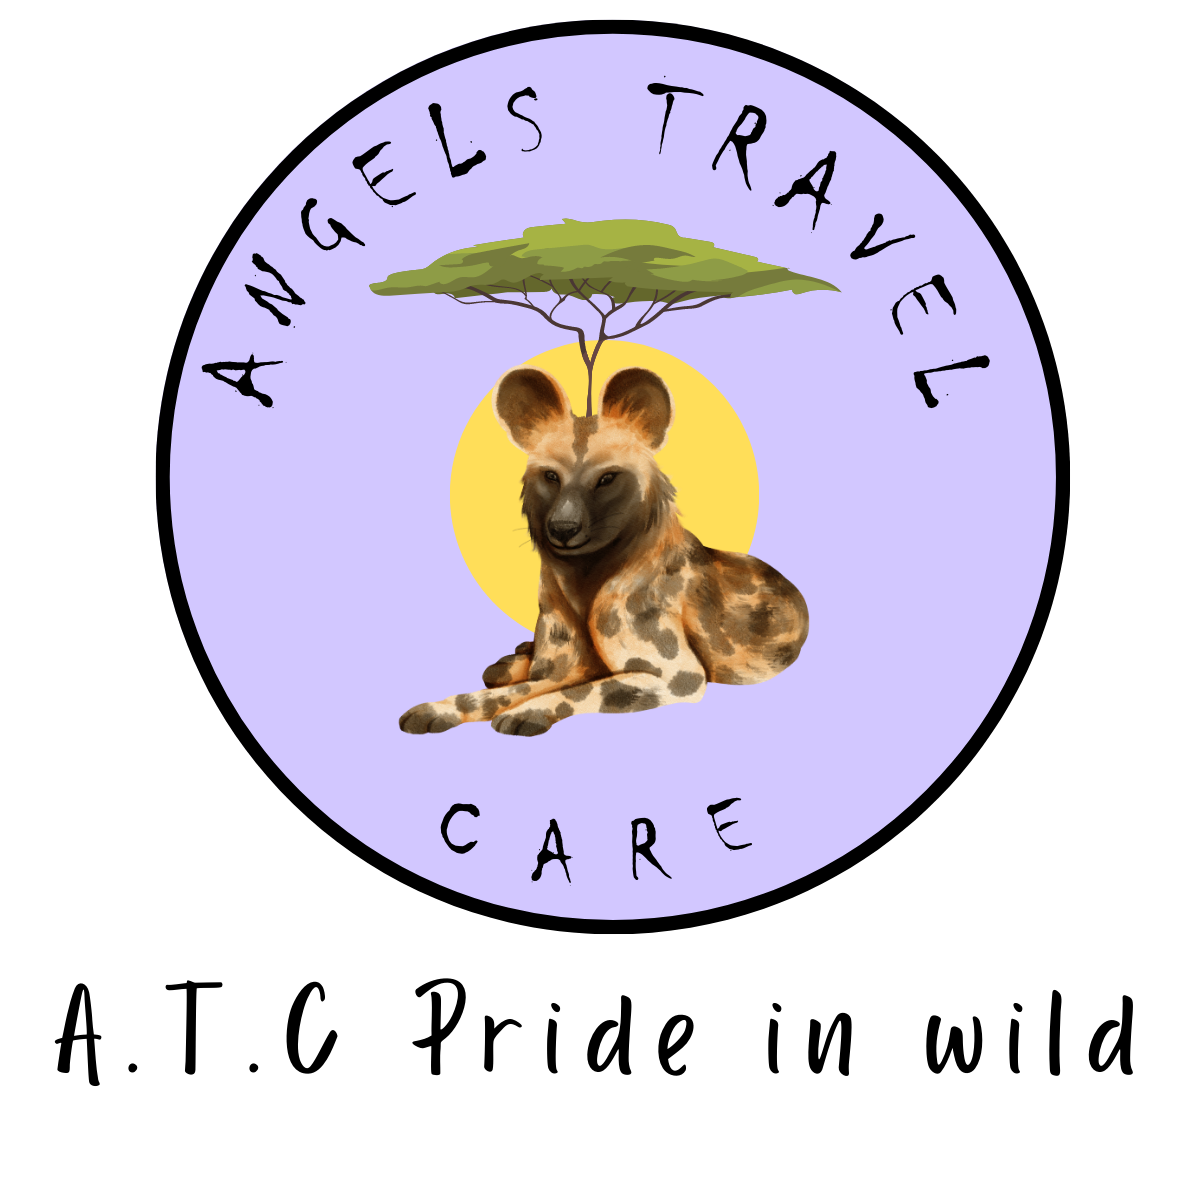 Angels Travel Care